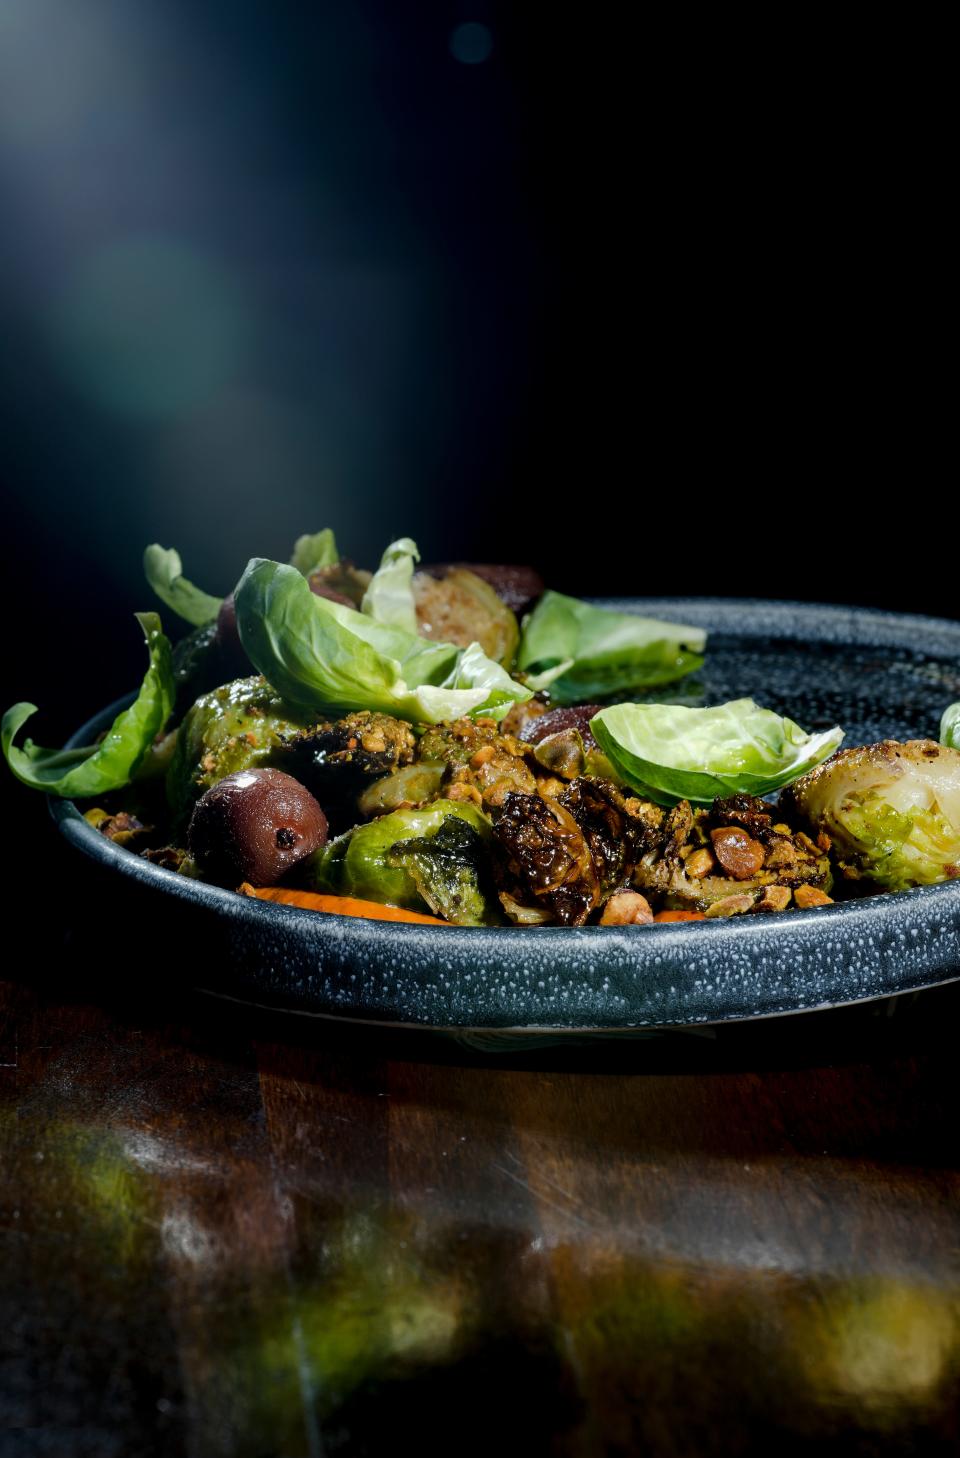 Wood-fired brussels sprouts with ras el hanout, pistachio, muhammara and balsamic roasted grapes is an autumn dish at Odd Duck in Walker's Point.